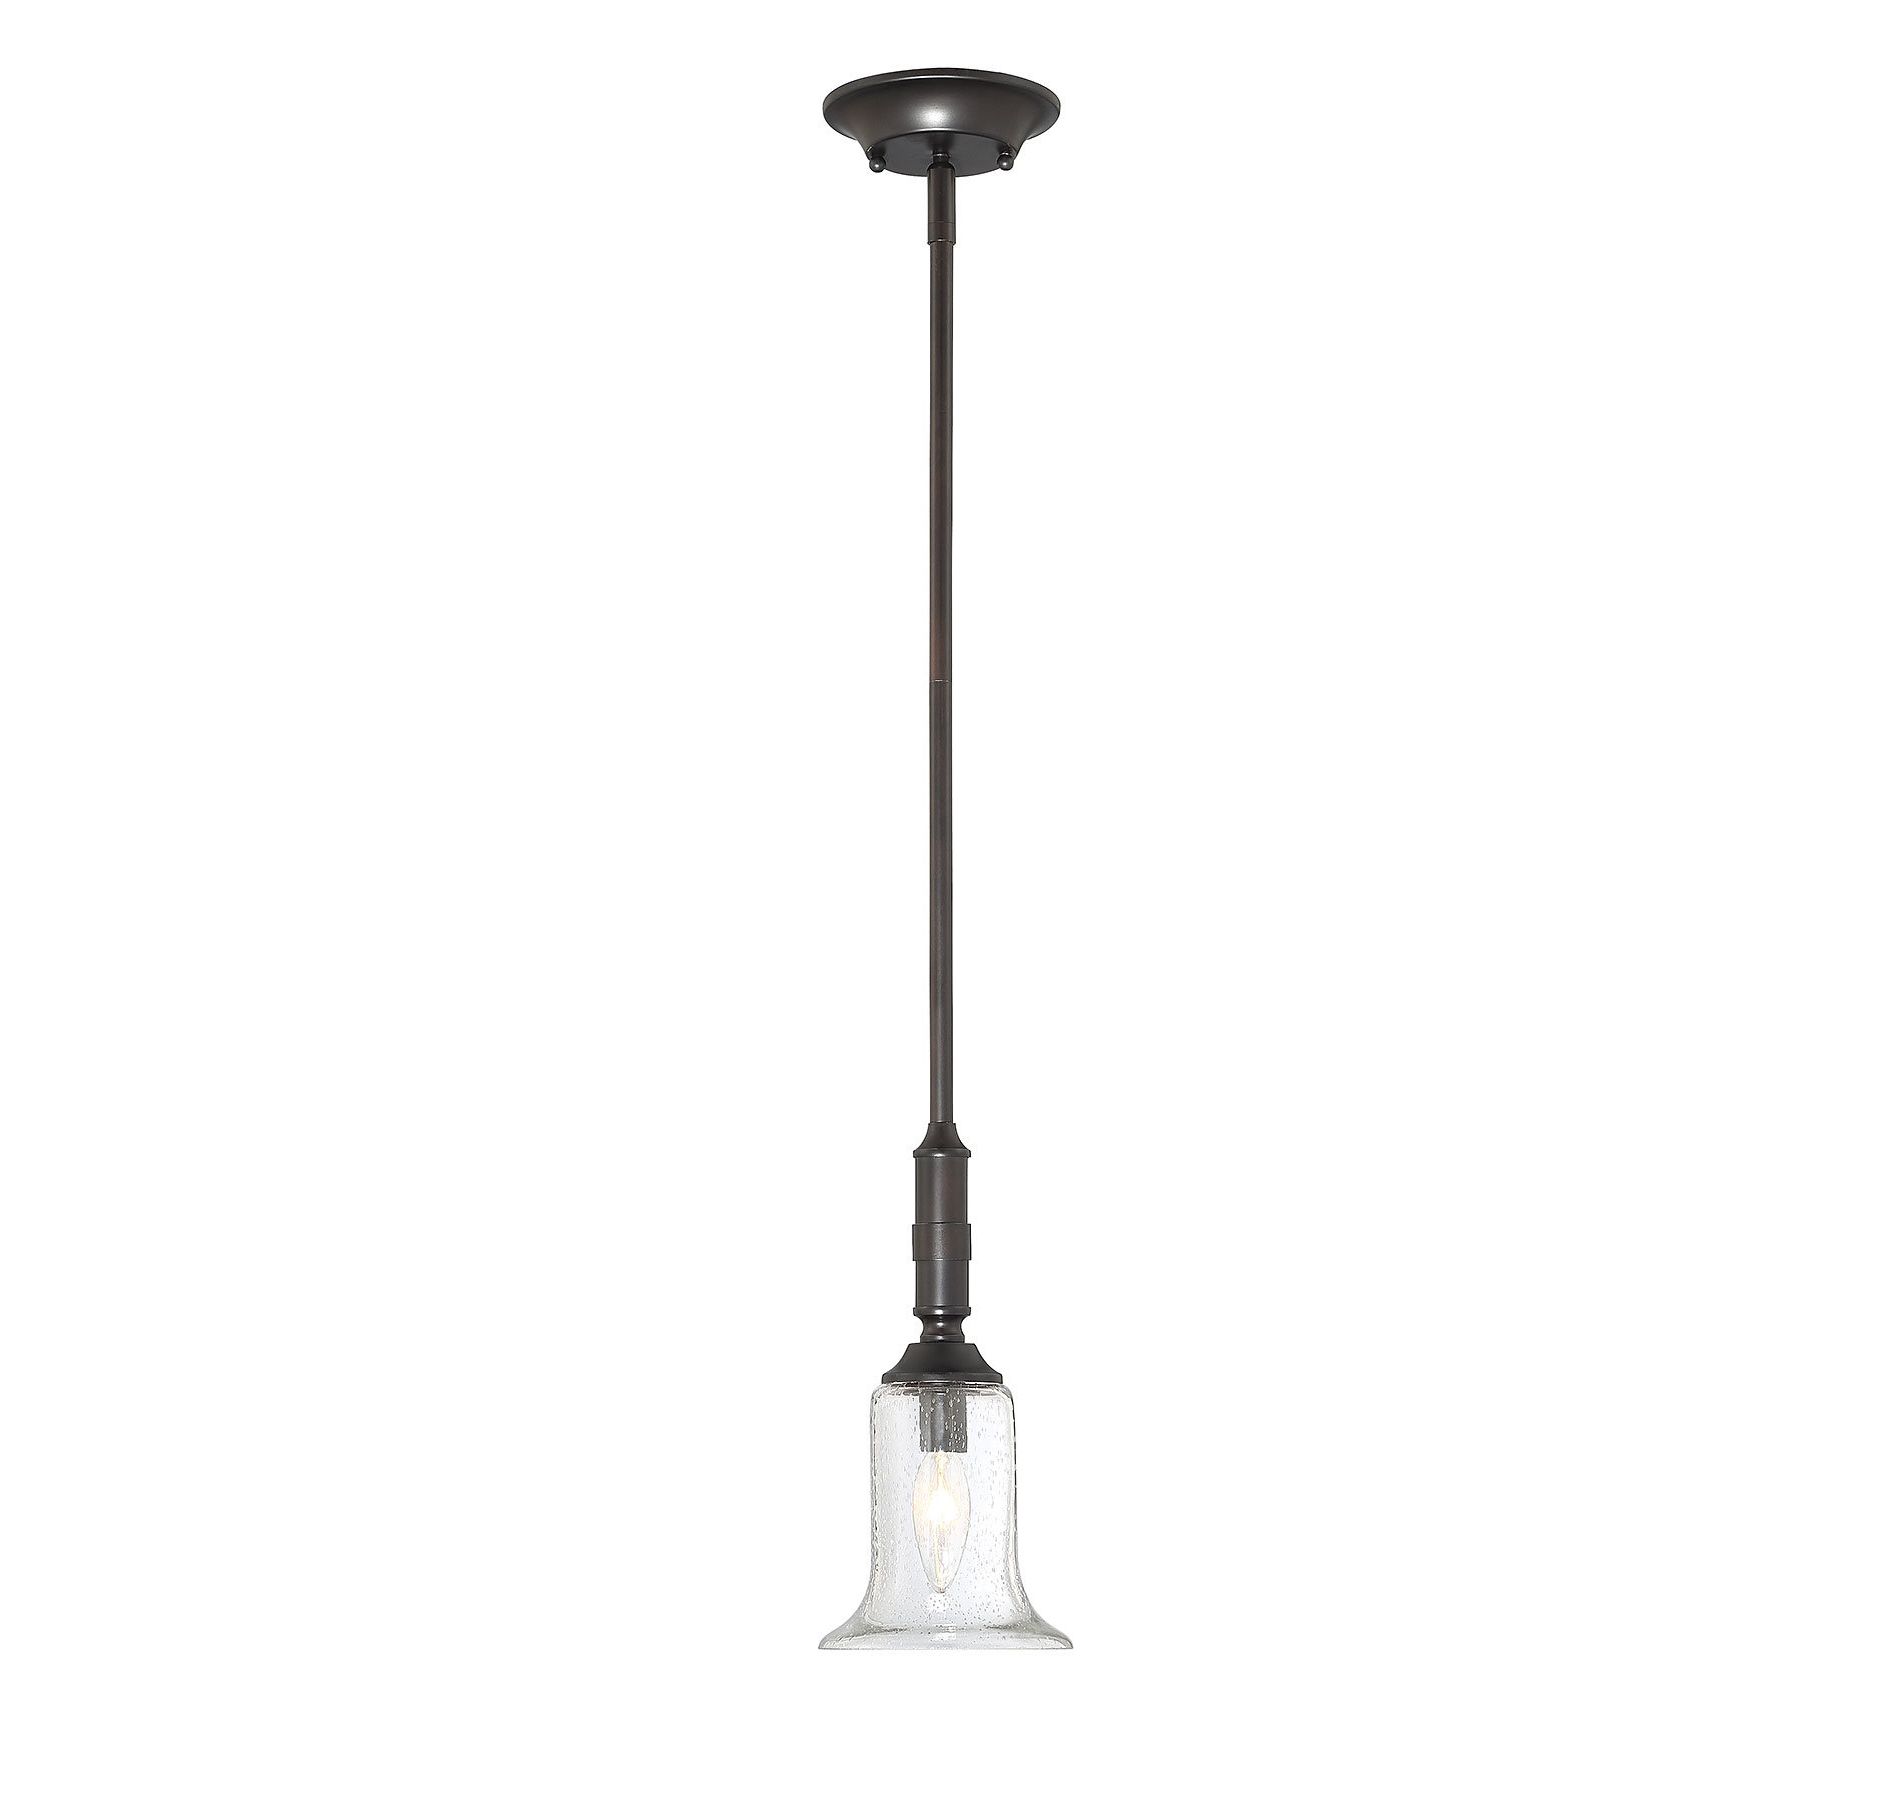 Widely Used Moyer 1 Light Single Cylinder Pendants Intended For Monterey 1 Light Bell Pendant (View 14 of 20)